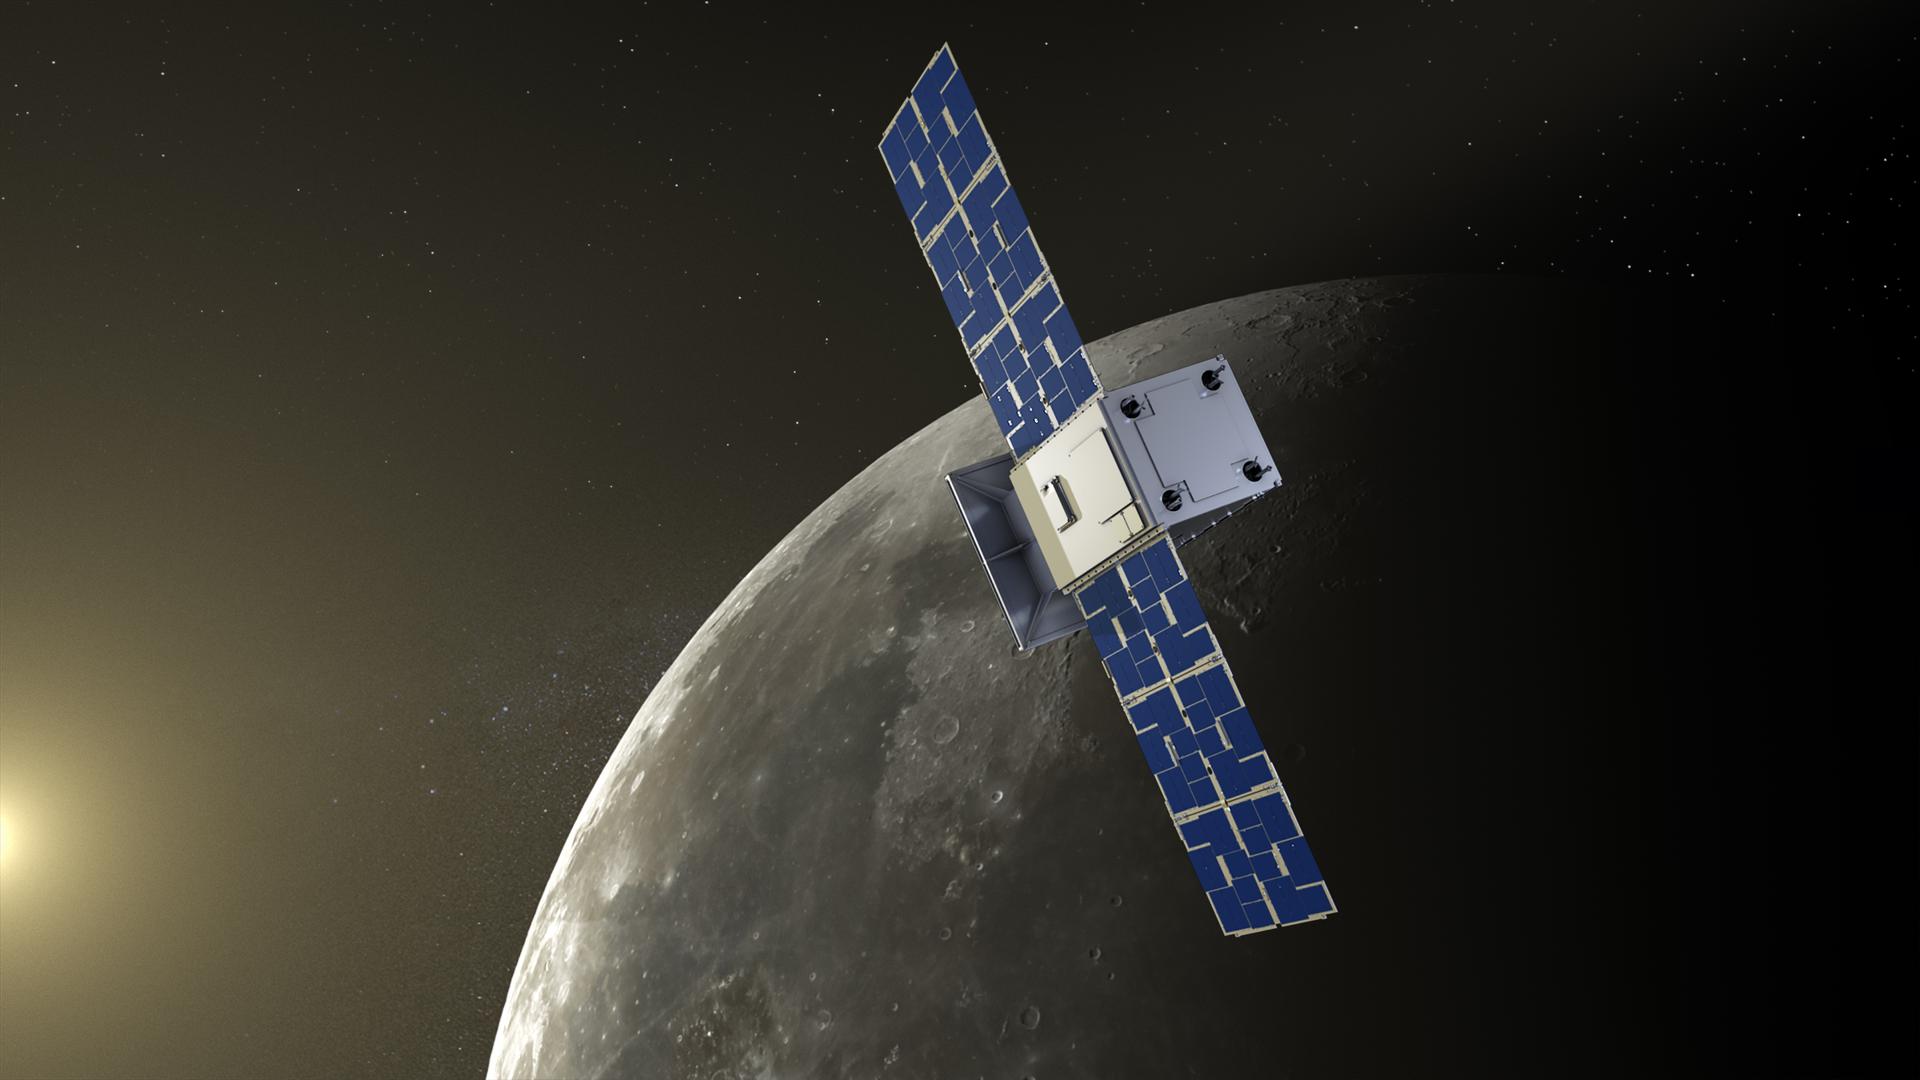 (Illustration) NASA's Cislunar Autonomous Positioning System Technology Operations and Navigation Experiment, or CAPSTONE, has finalized its orbit at the Moon and is now in the operational phase of its mission.